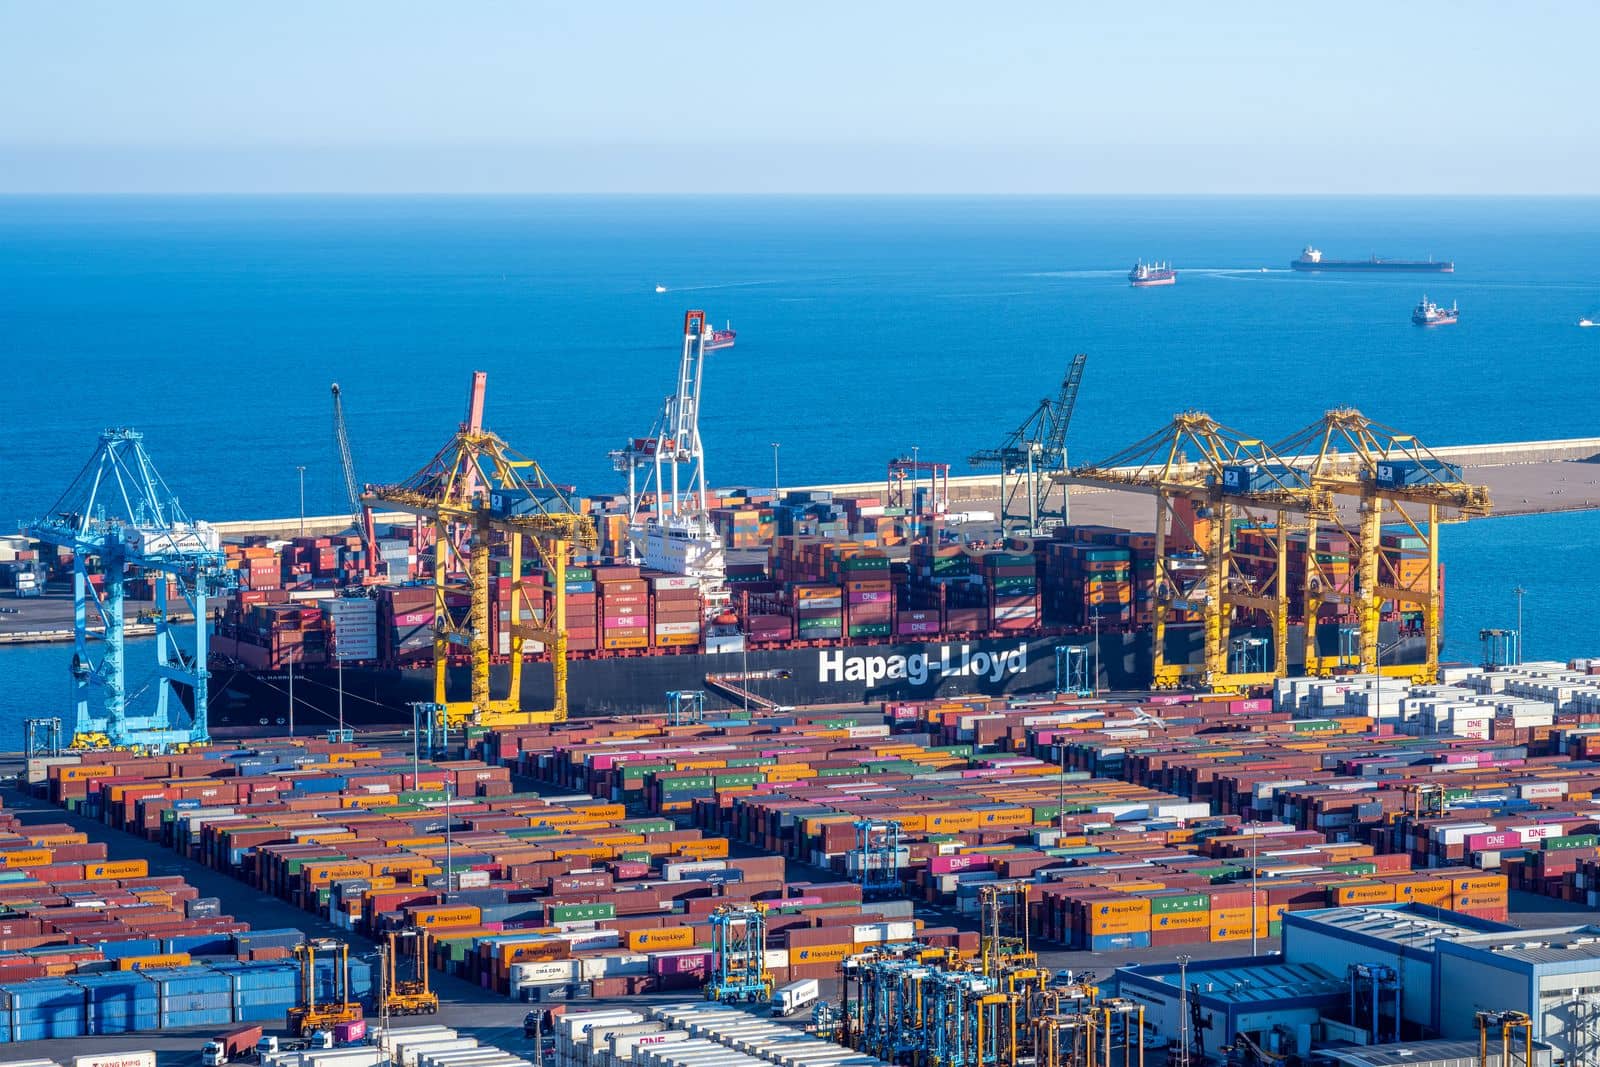 BARCELONA, SPAIN - January 31, 2023: The commercial harbour of Barcelona with a container ship, cranes and storage tanks